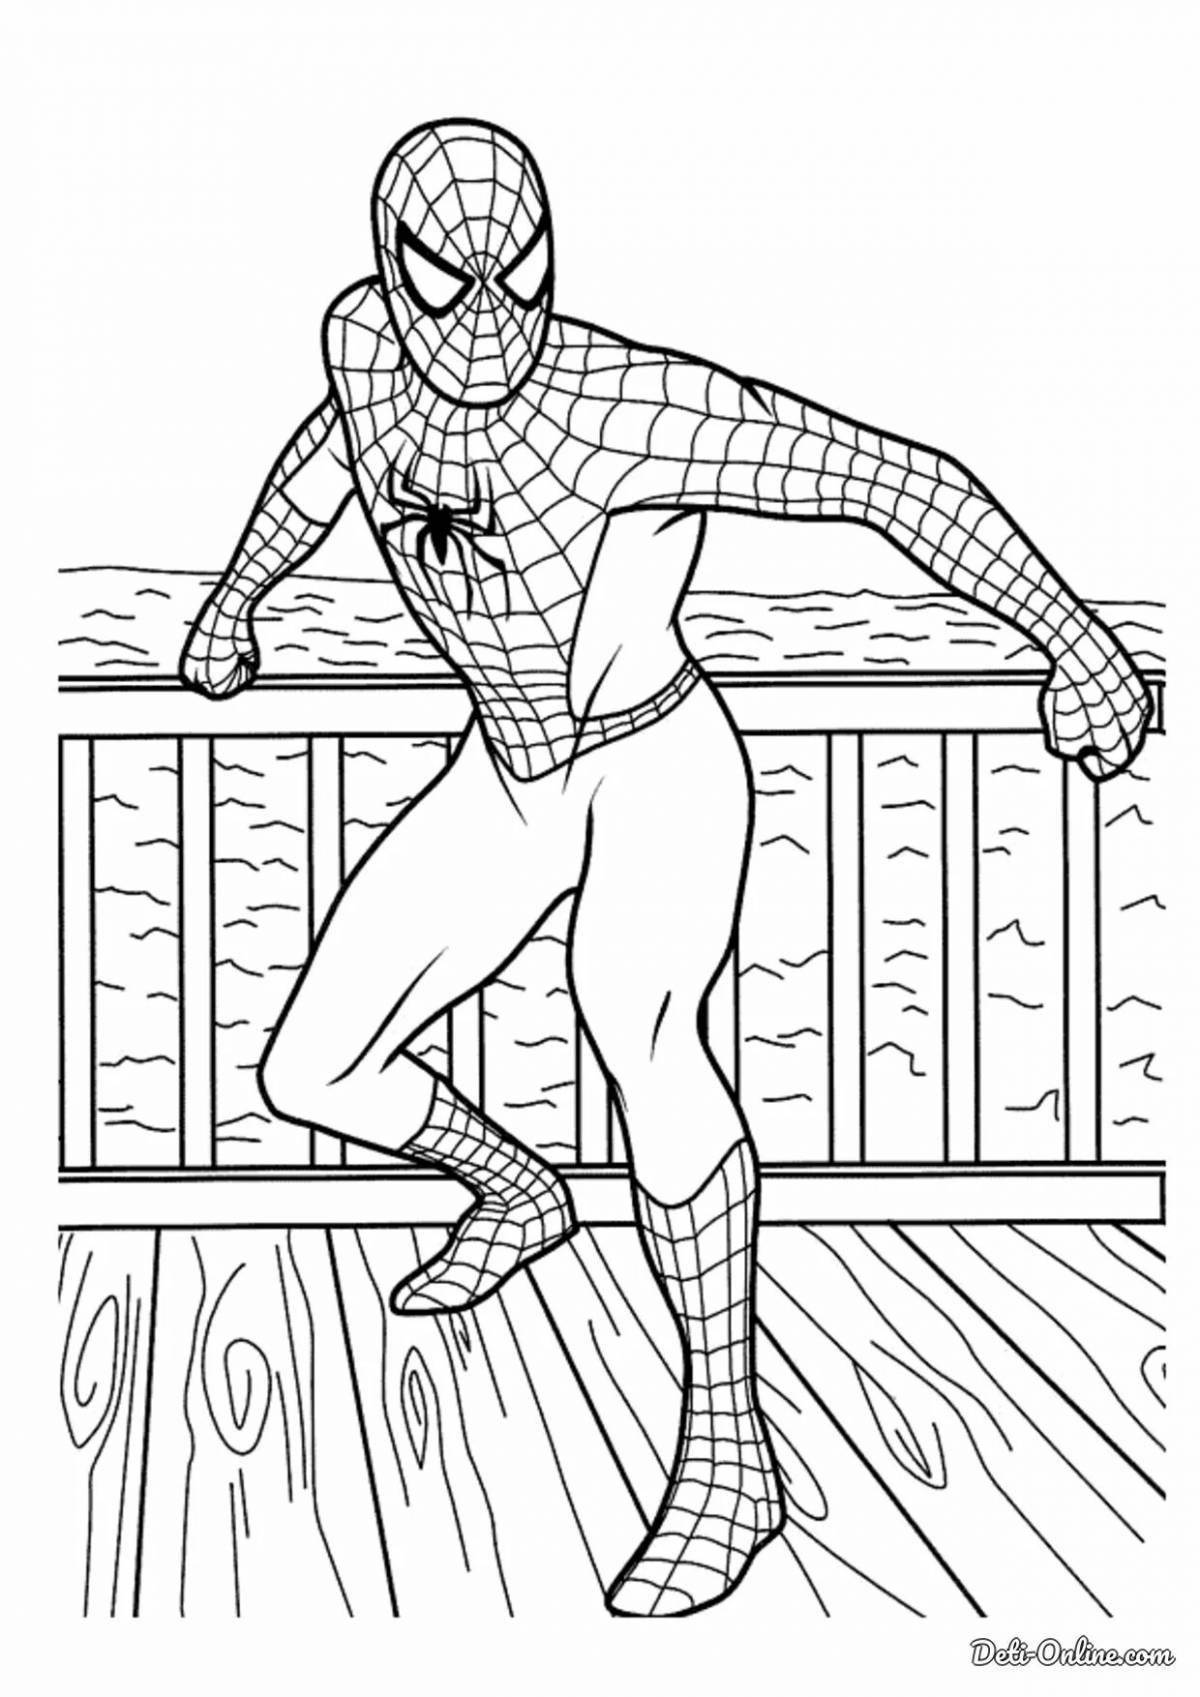 Funny Spider-Man coloring pages for kids